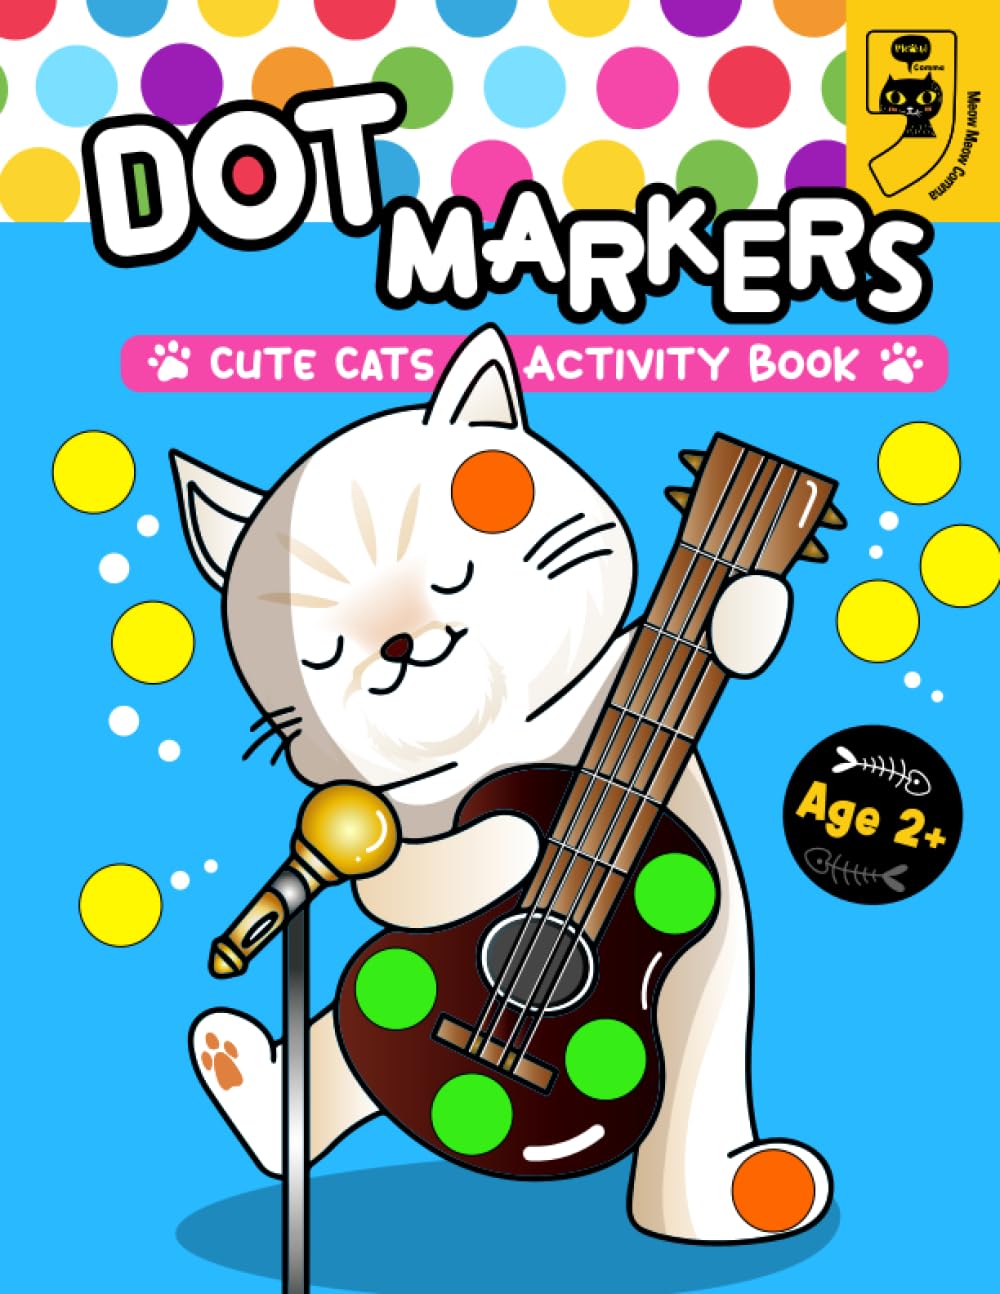 Dot Markers Cute Cats Activity Book for Kids: Explore A World of Creativity with Dot Markers and Kittens for Toddlers and Preschoolers (Dot Markers Activity Book for Toddlers and Preschoolers)